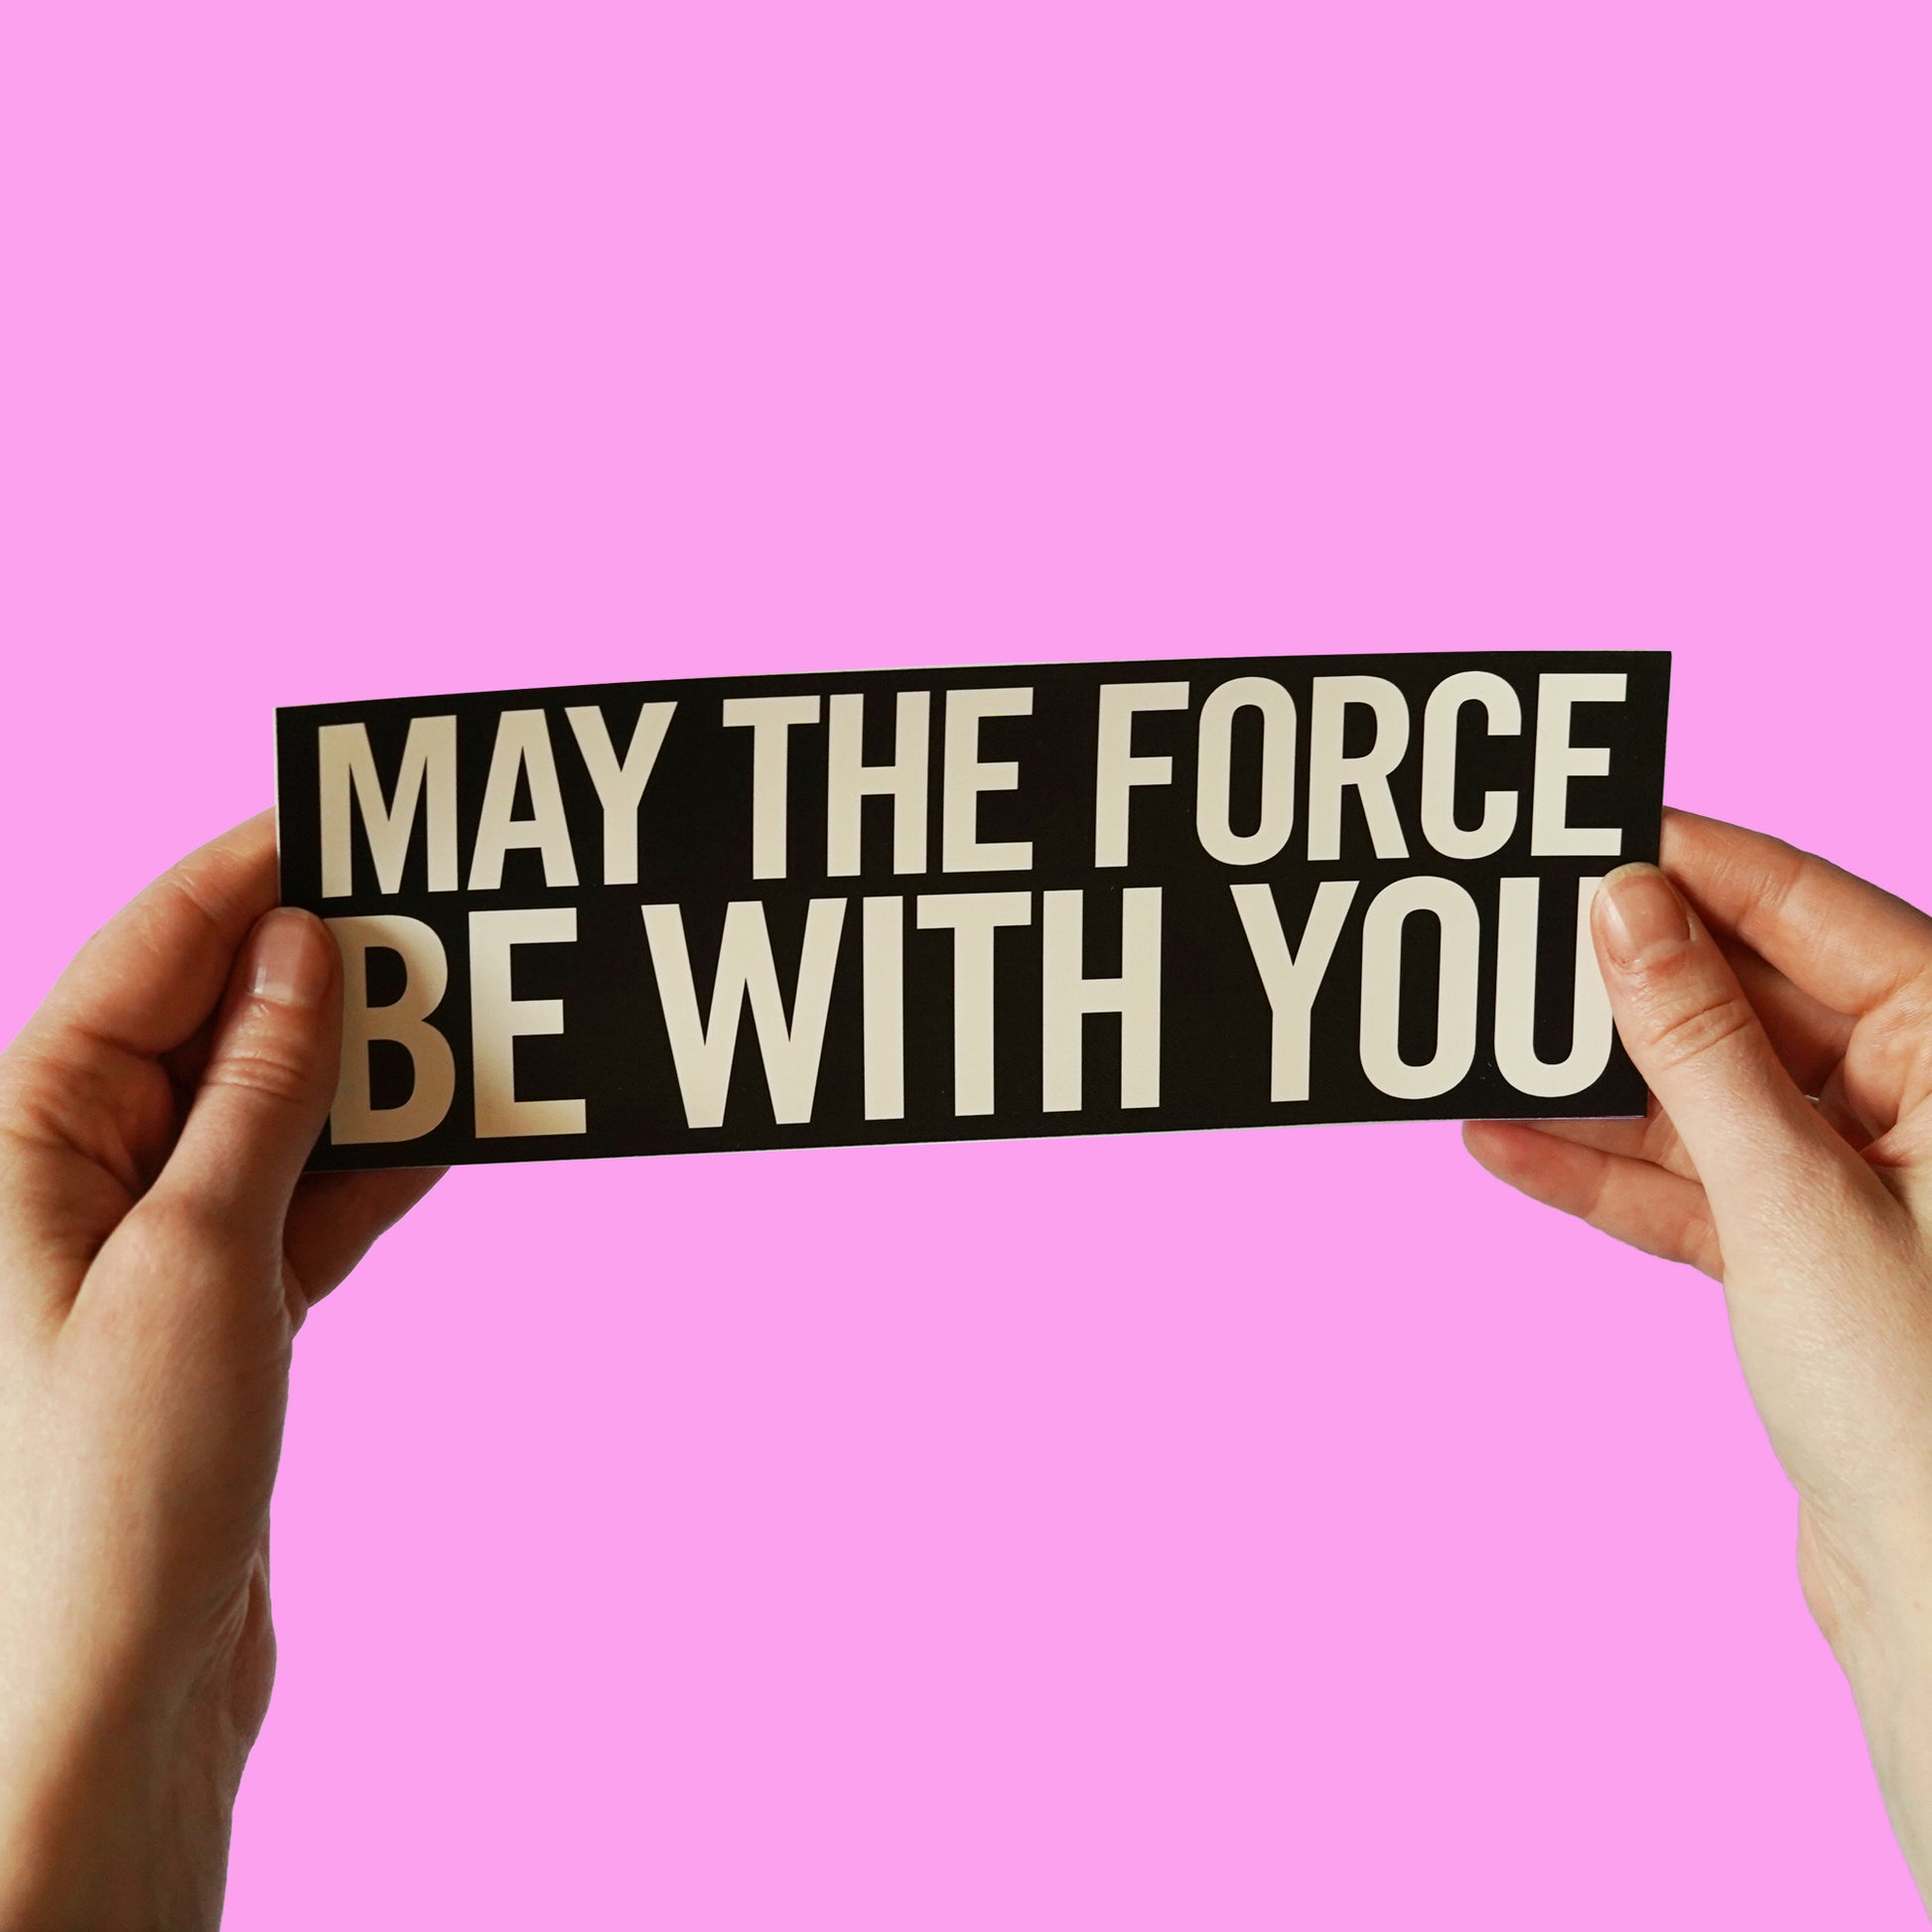 Star Wars Sticker, 'May the Force be with you'